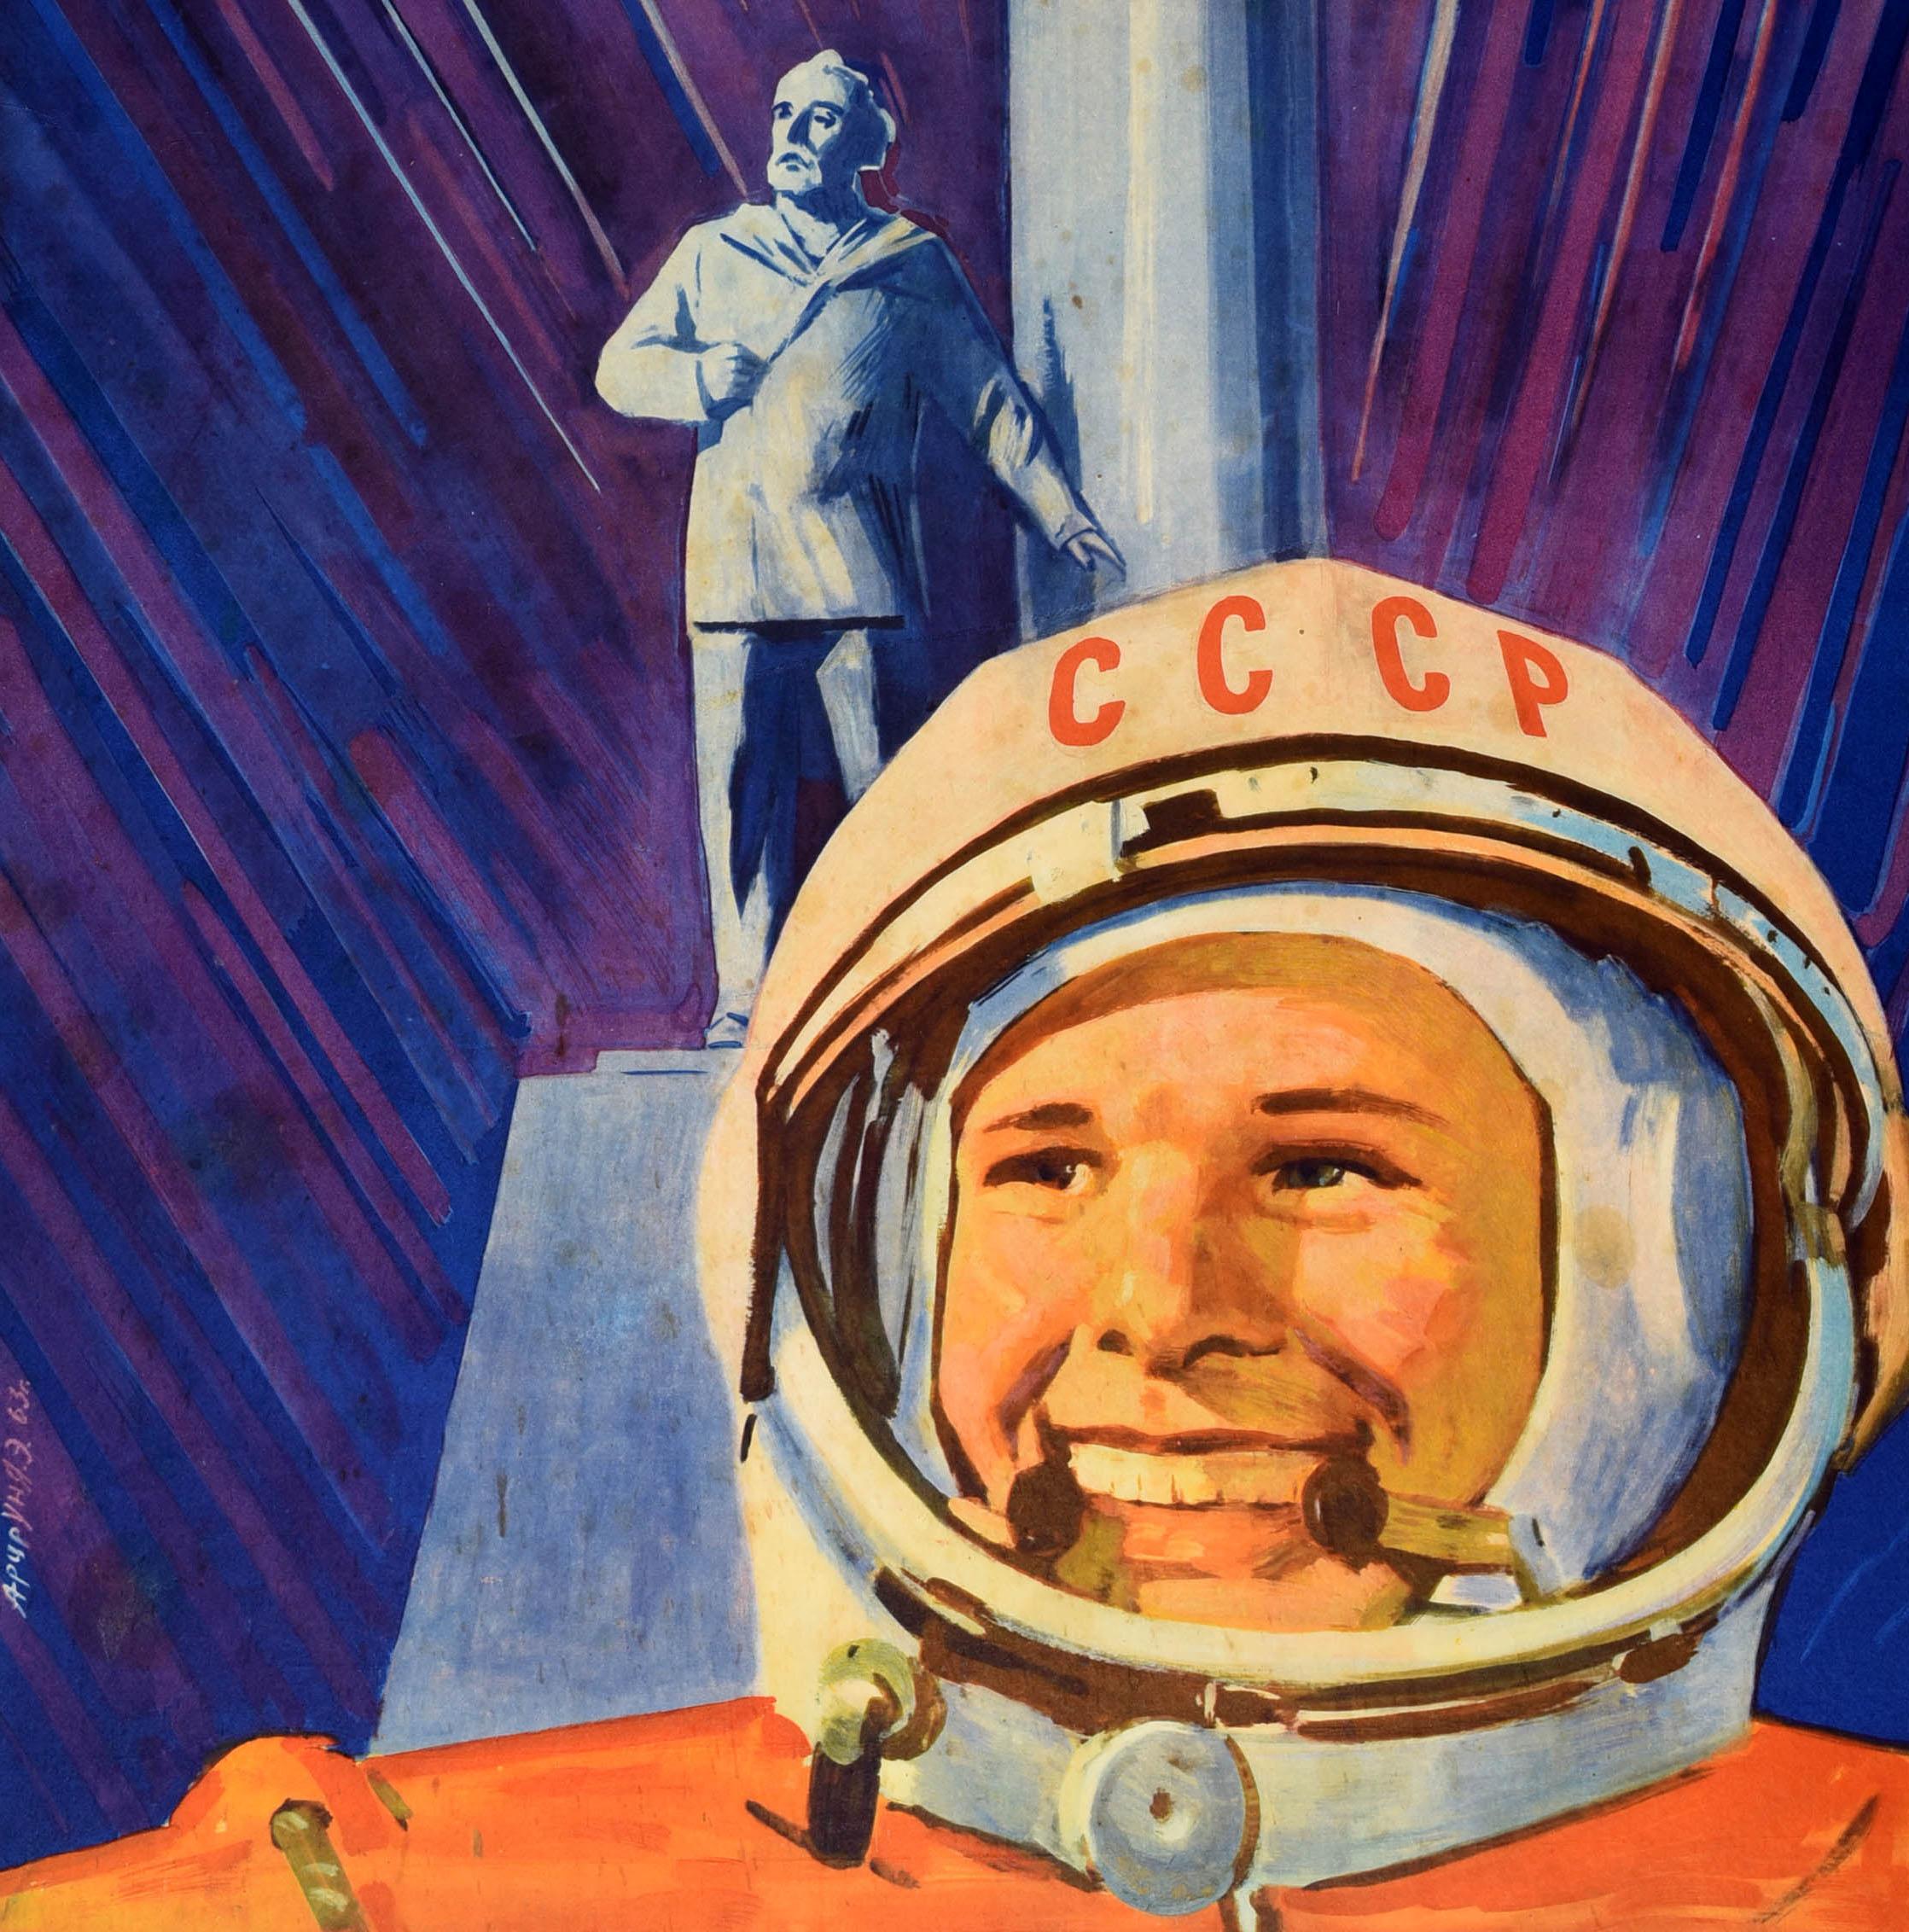 Original vintage Soviet propaganda poster - Our Motherland is the Pioneer of Space! / ???? ?????? ?????? ???????! Dynamic design featuring a smiling Yuri Gagarin (Yuri Alekseyevich Gagarin; 1934-1968), the Soviet pilot and cosmonaut who was the